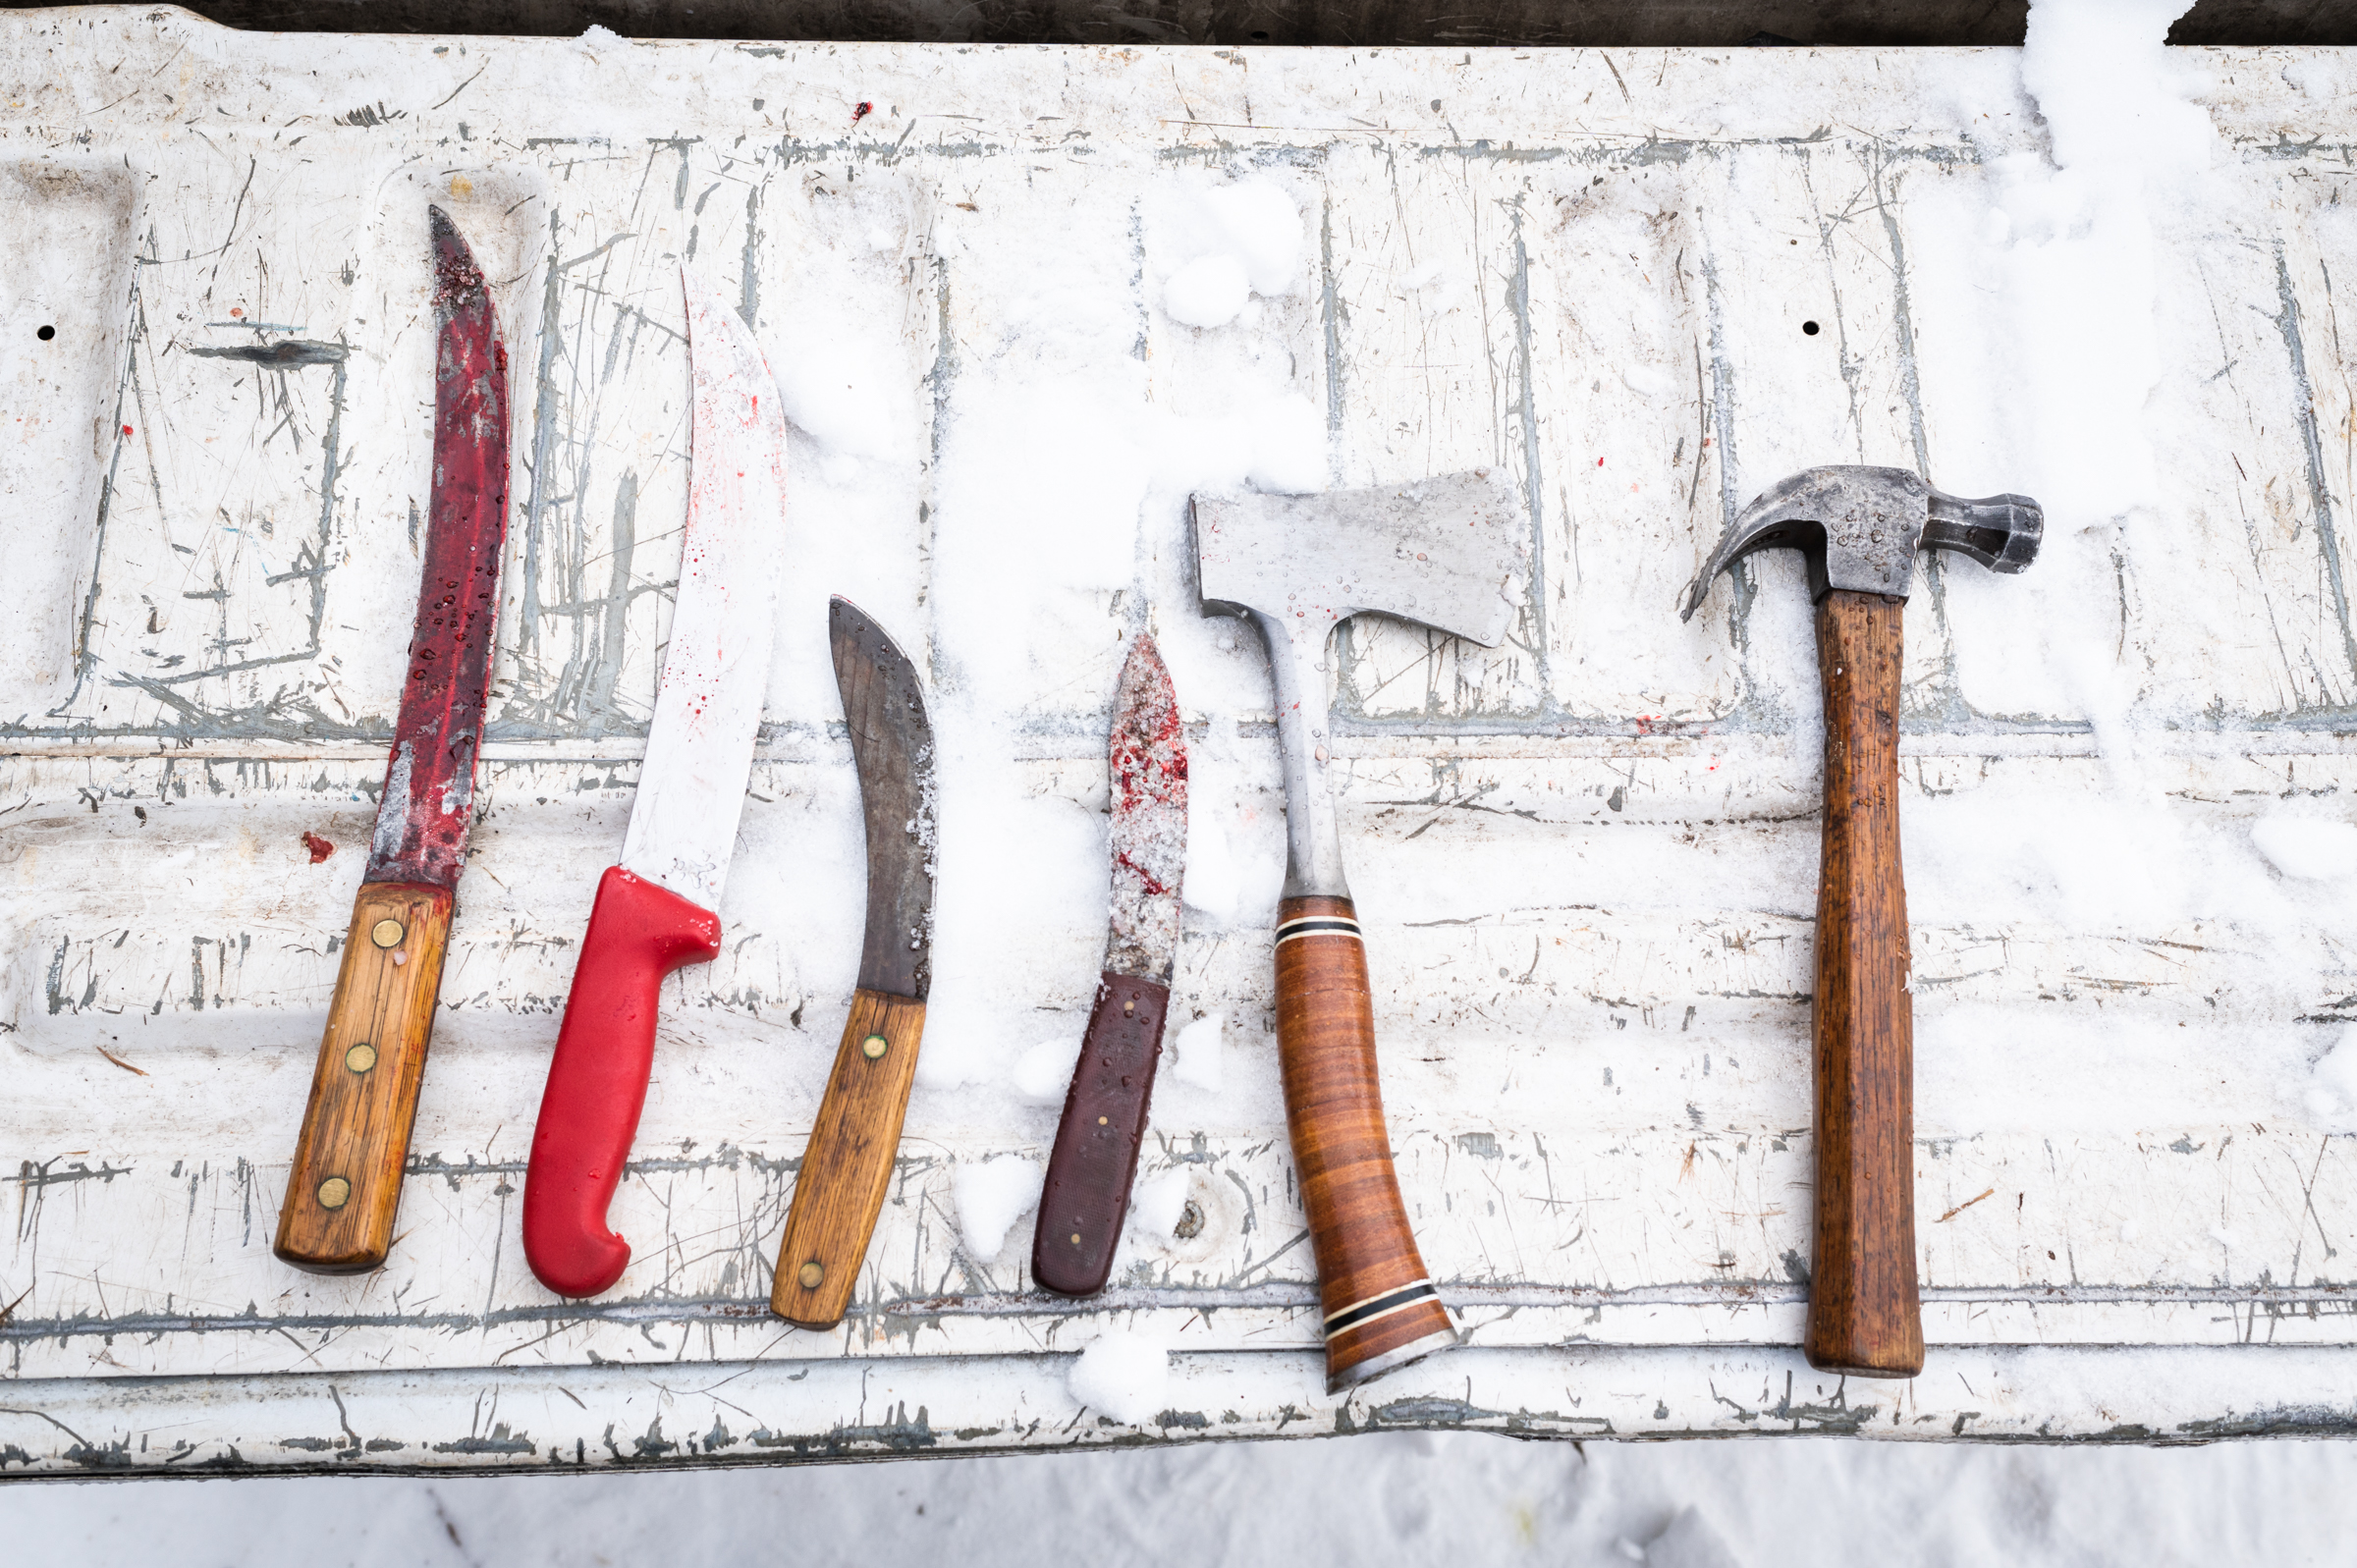 Tools for butchering - various knives, a hatchet, and a hammer